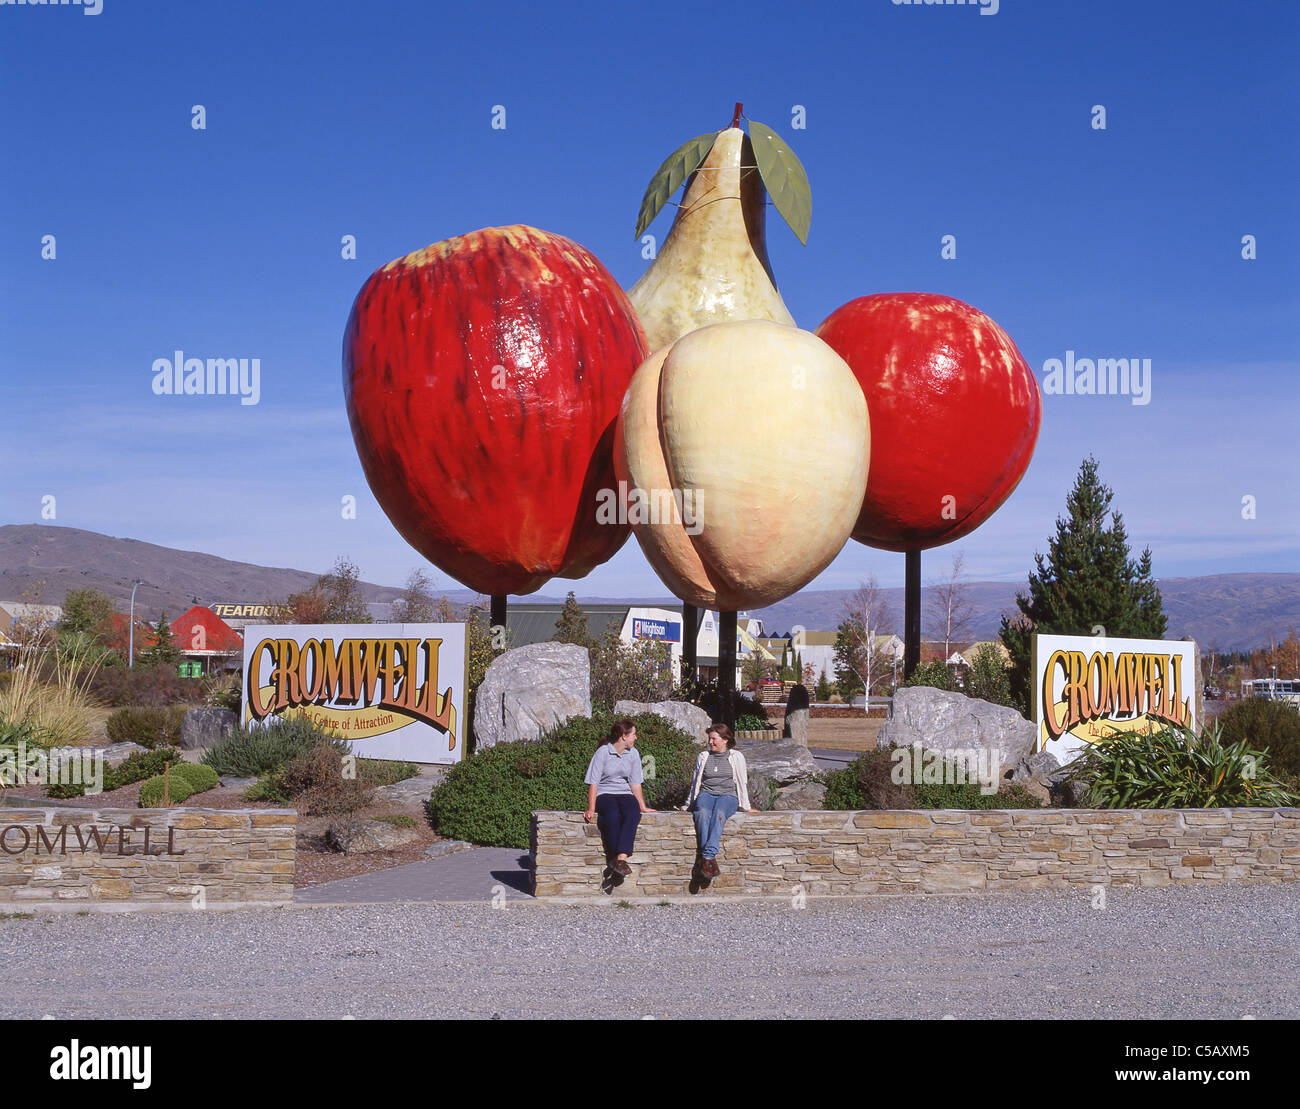 Giant fruit sculpture and welcome sign, Cromwell, Otago Region, South Island, New Zealand Stock Photo